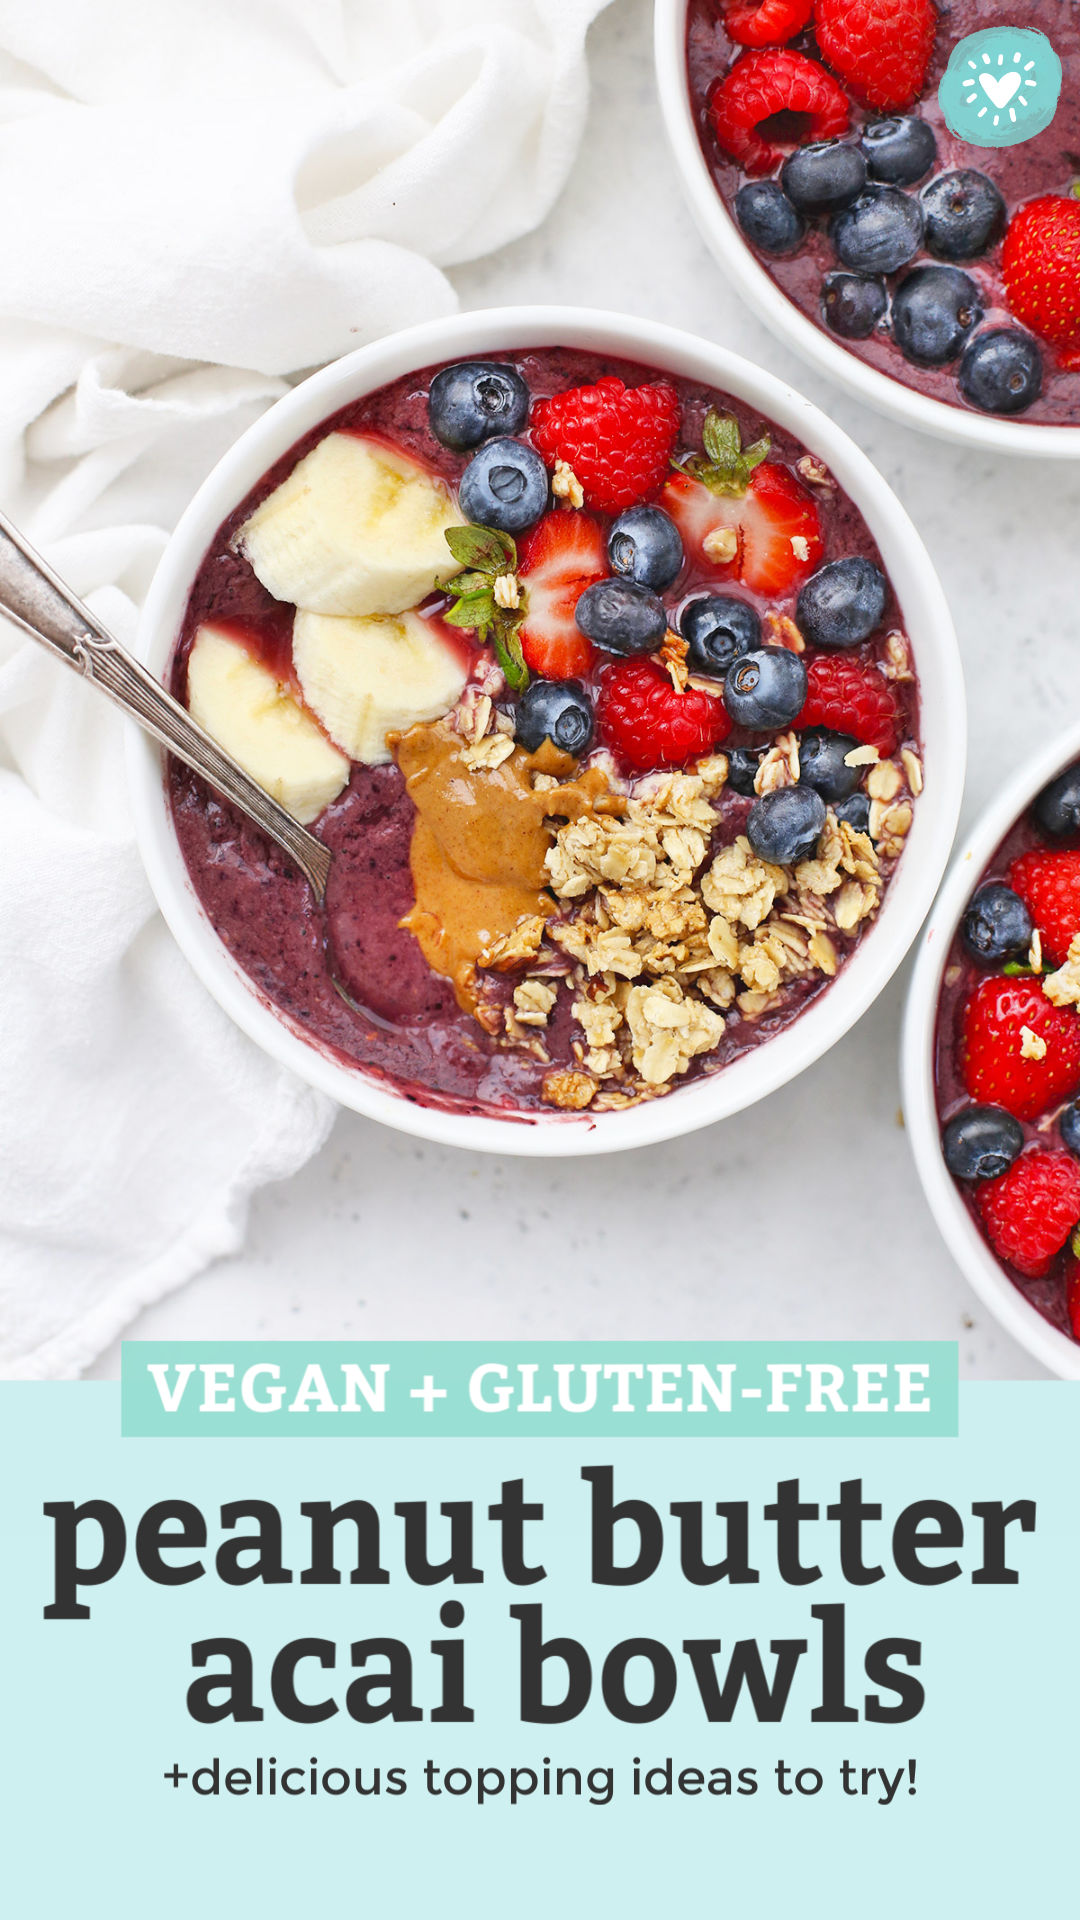 Peanut Butter Acai Bowls With Granola, fresh berries, peanut butter and banana with text overlay that reads "Vegan + Gluten-Free Peanut Butter Acai Bowls +Delicious Topping Ideas to Try!"